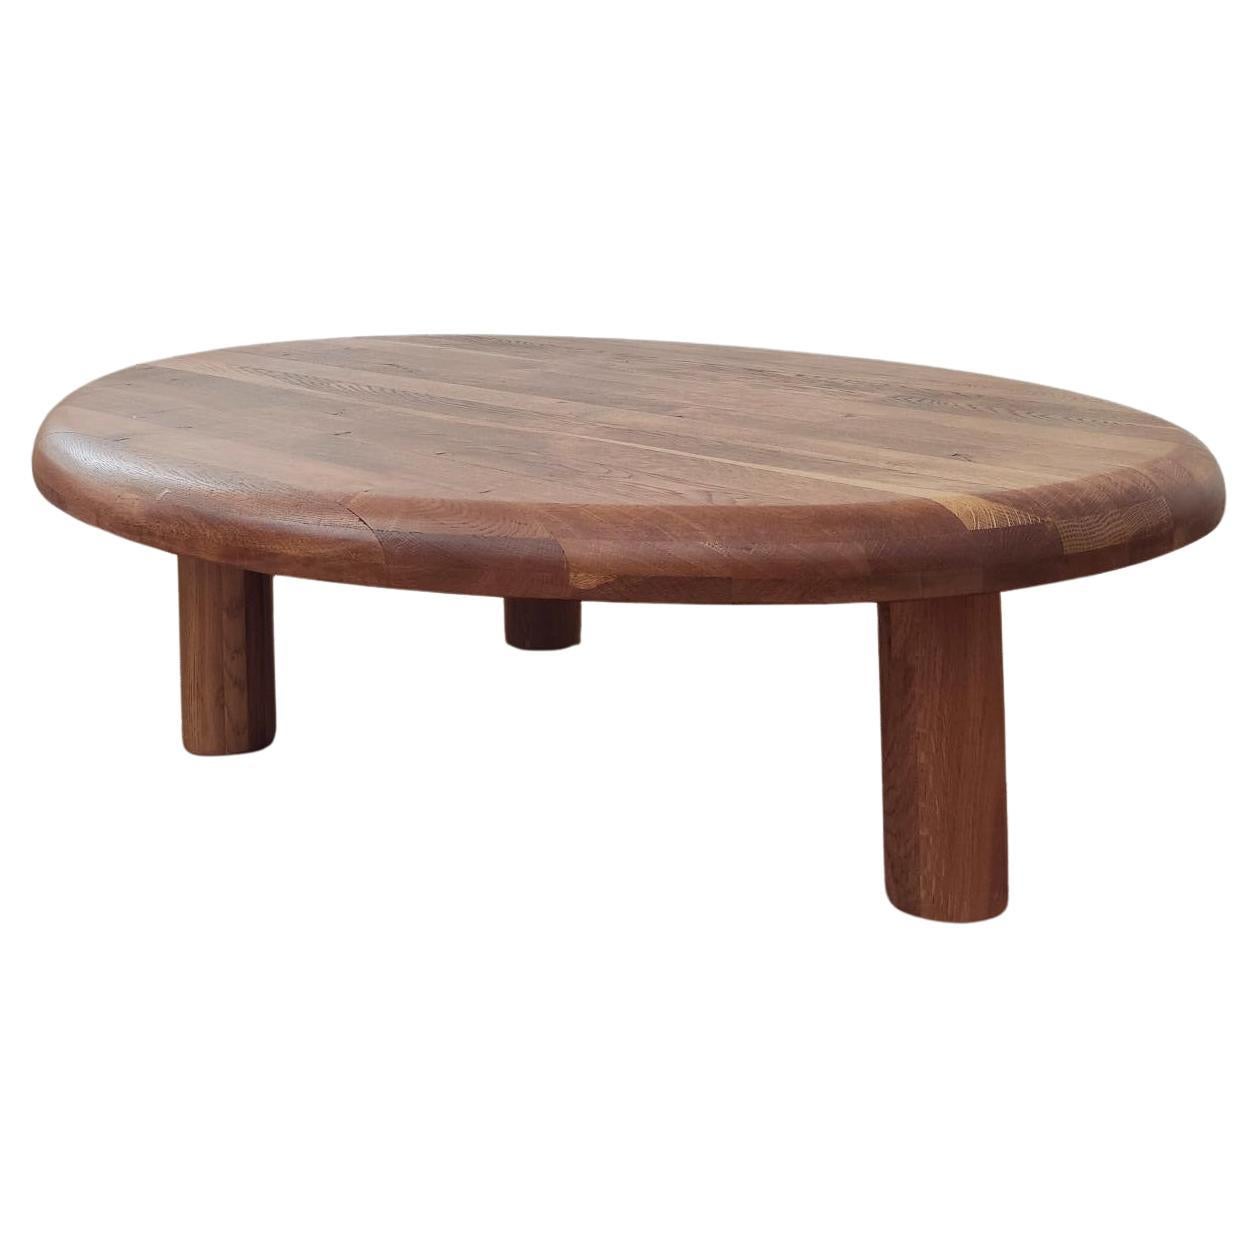 Oval wooden tripod coffee table For Sale